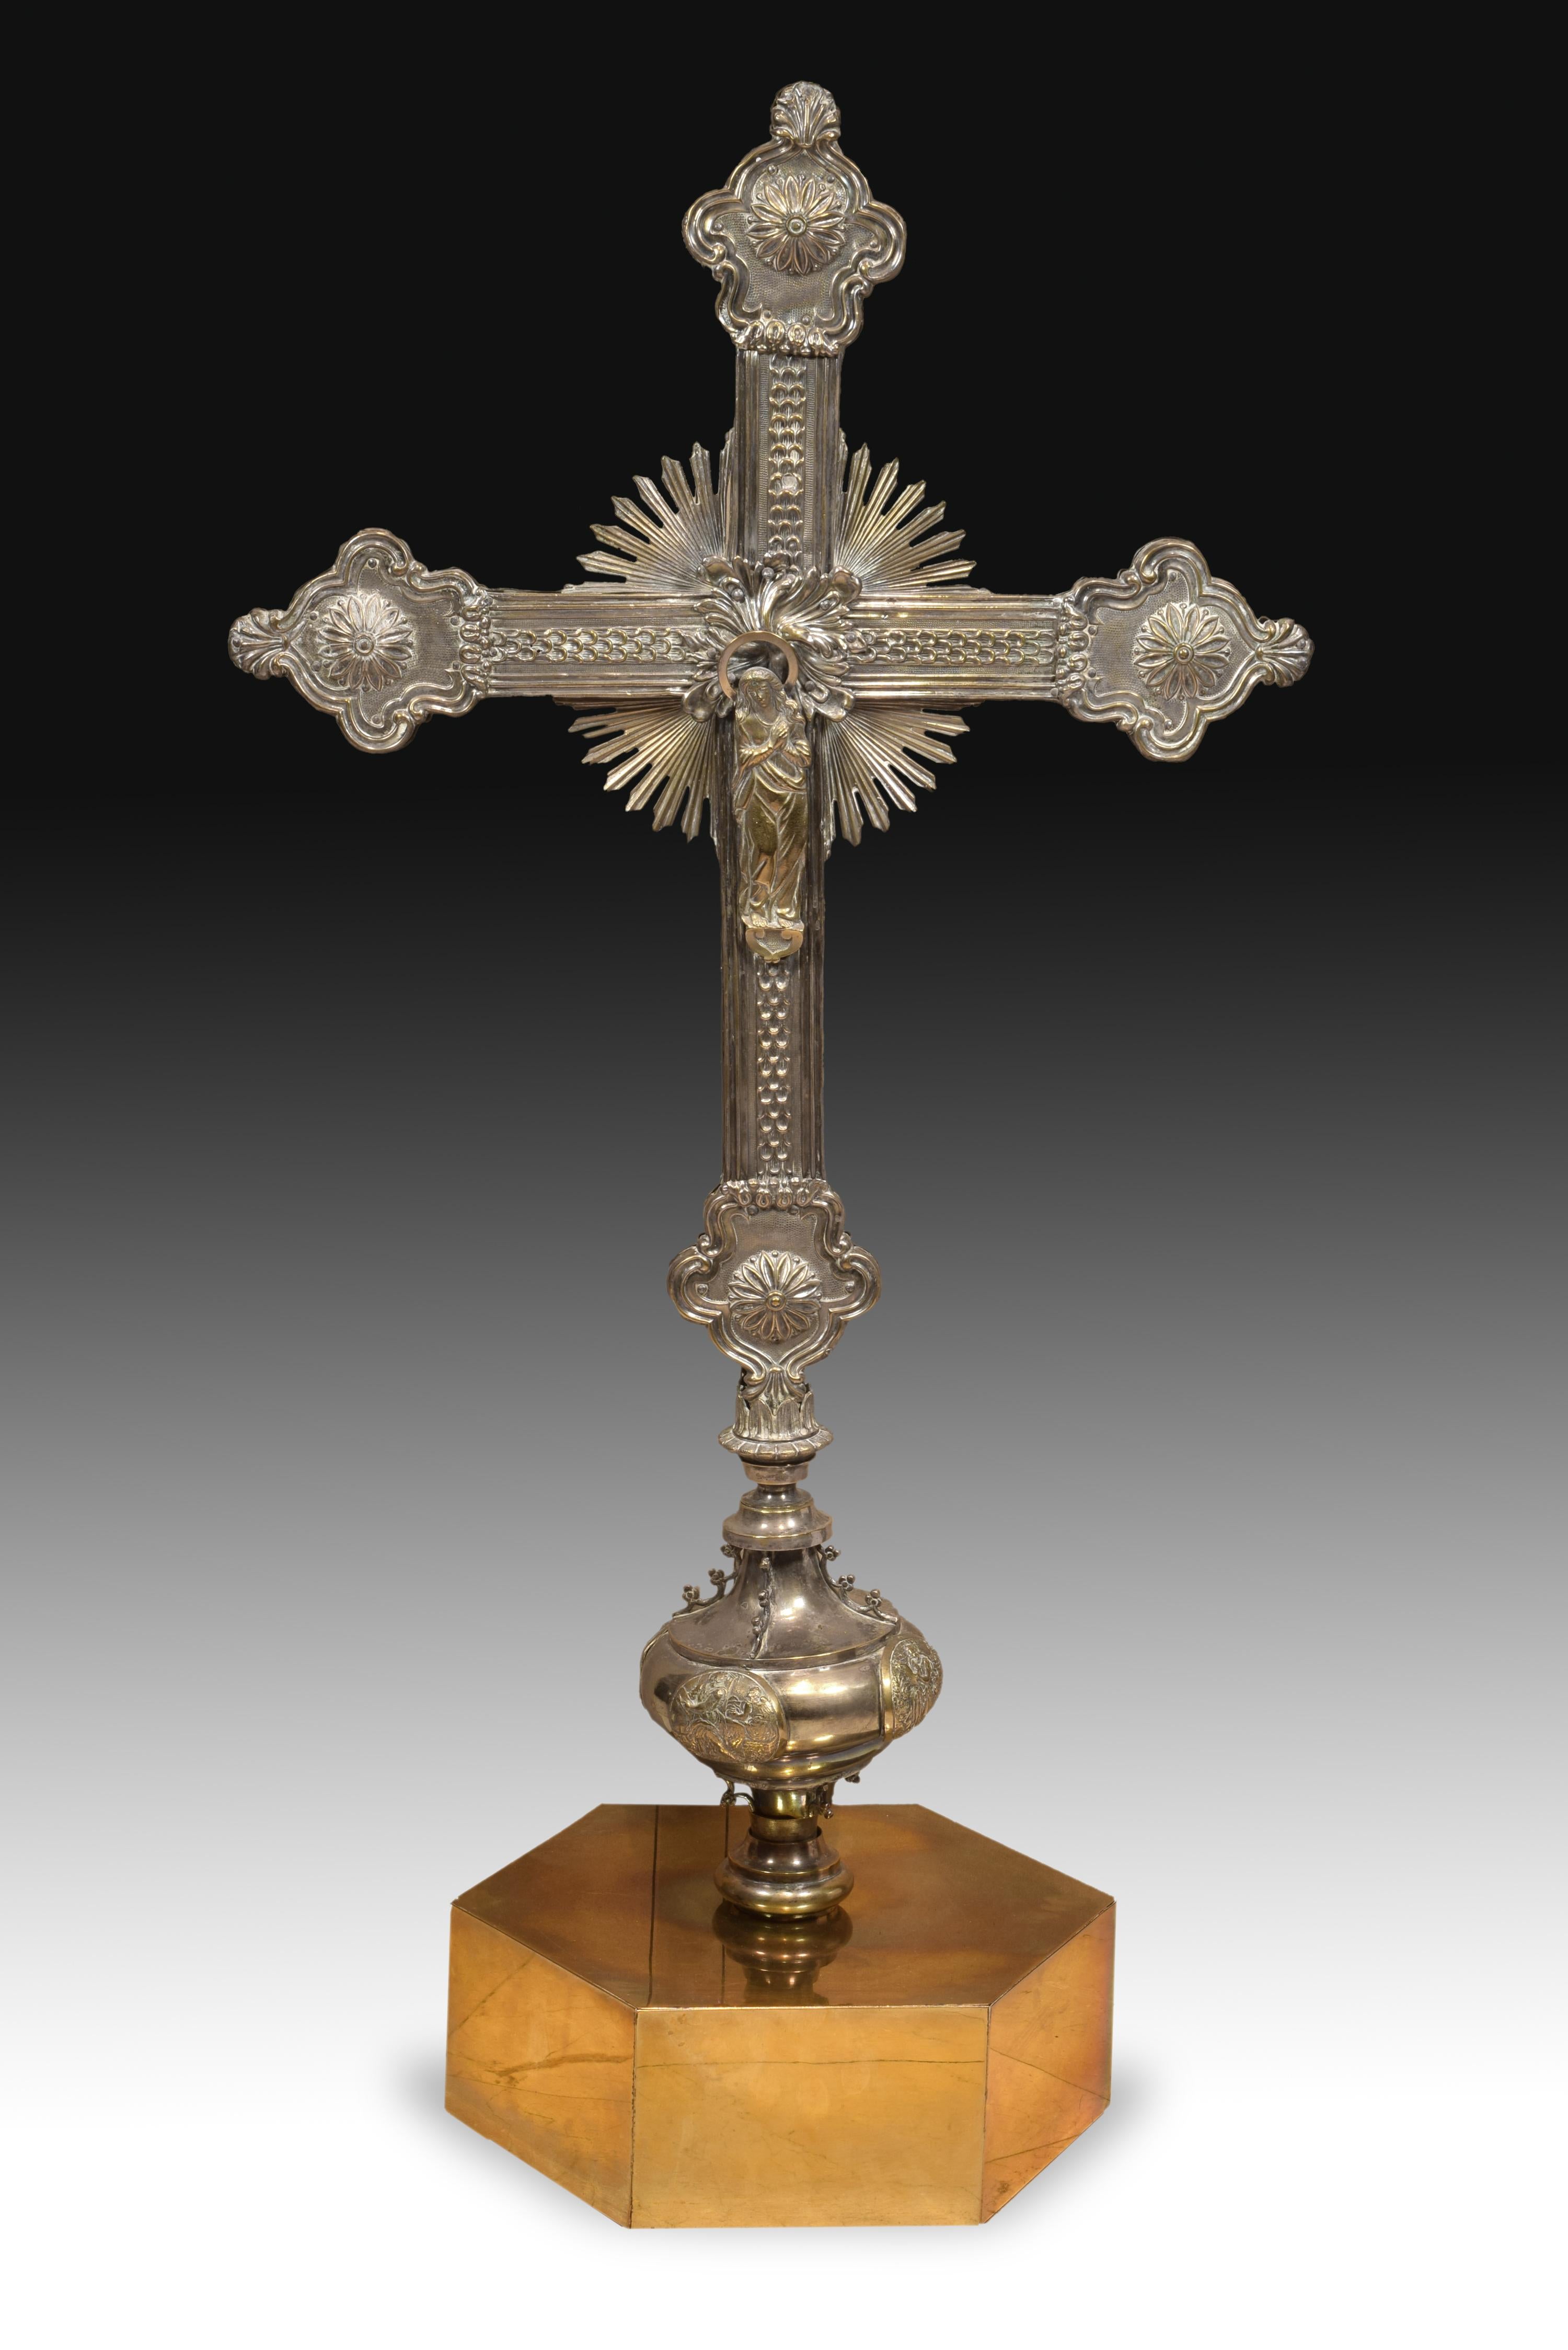 End of processional cross. Ormolu, 20th century.
 Latin cross with straight arms with decoration of tongues between moldings on both fronts, rays at the intersection of the arms, and polylobed finishes recalling the flordellisations decorated with